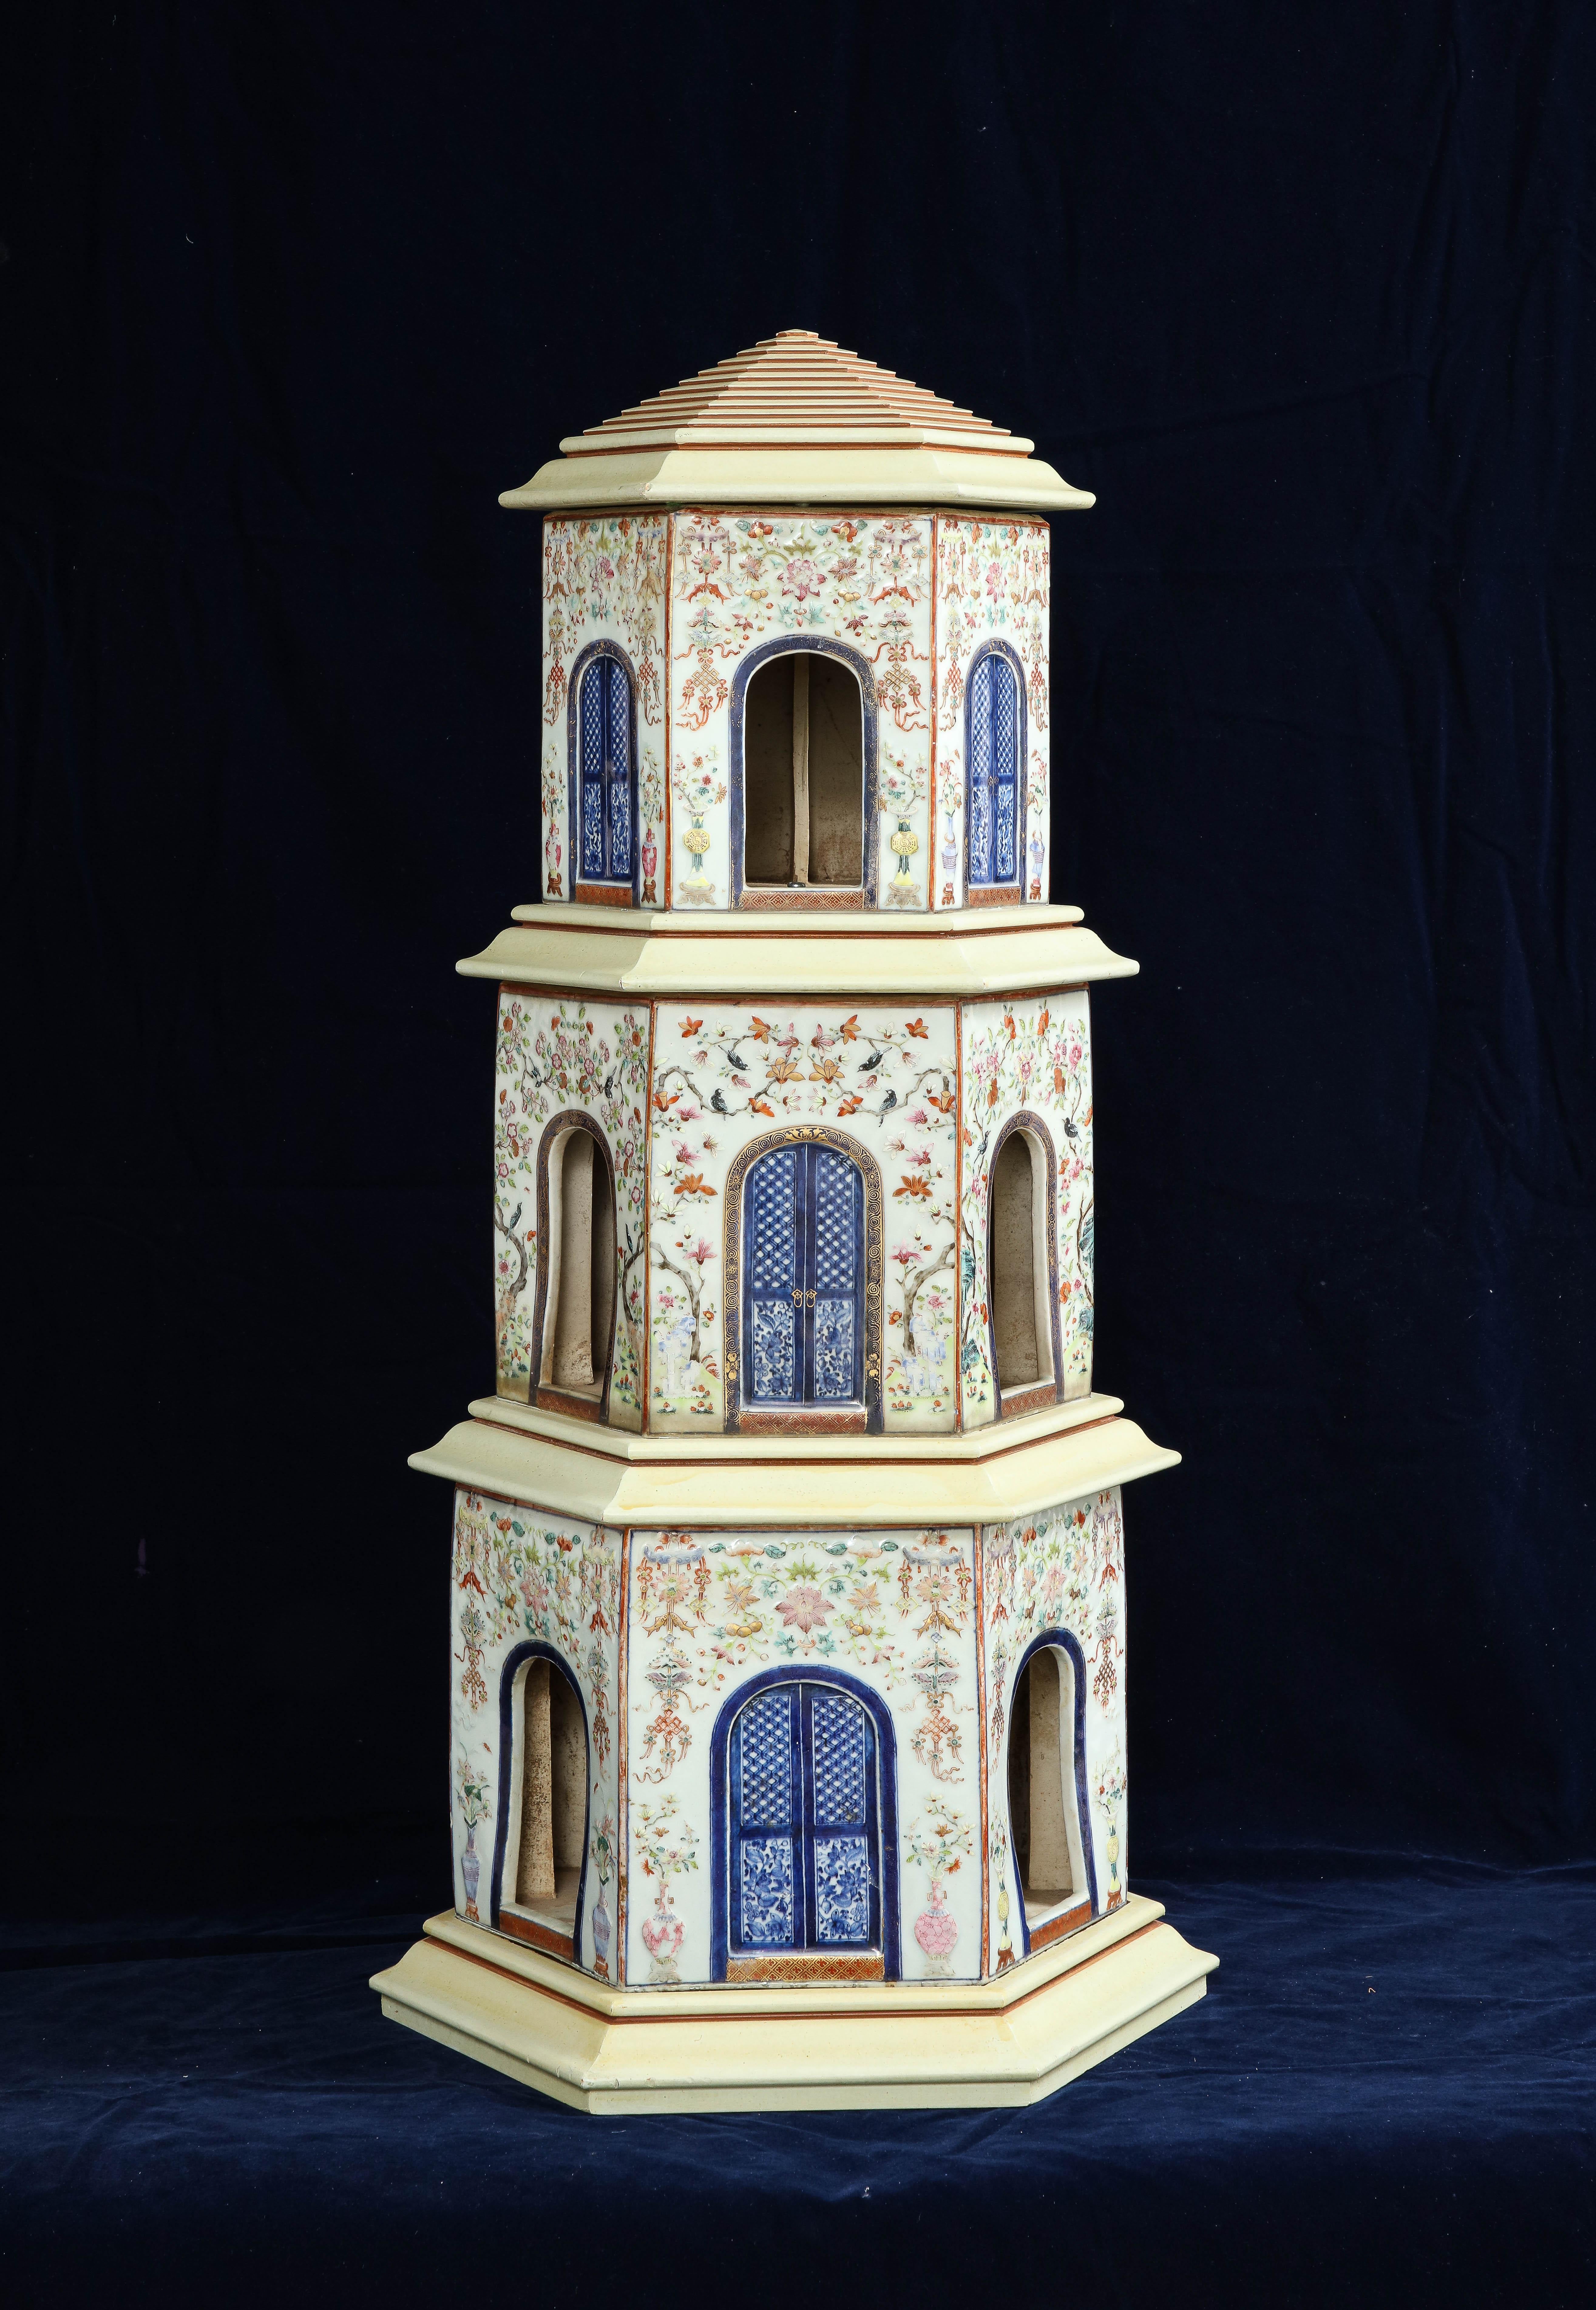 Enameled 18th C. Large Chinese Qianlong Period Famille Rose Porcelain Pagoda Centerpiece For Sale